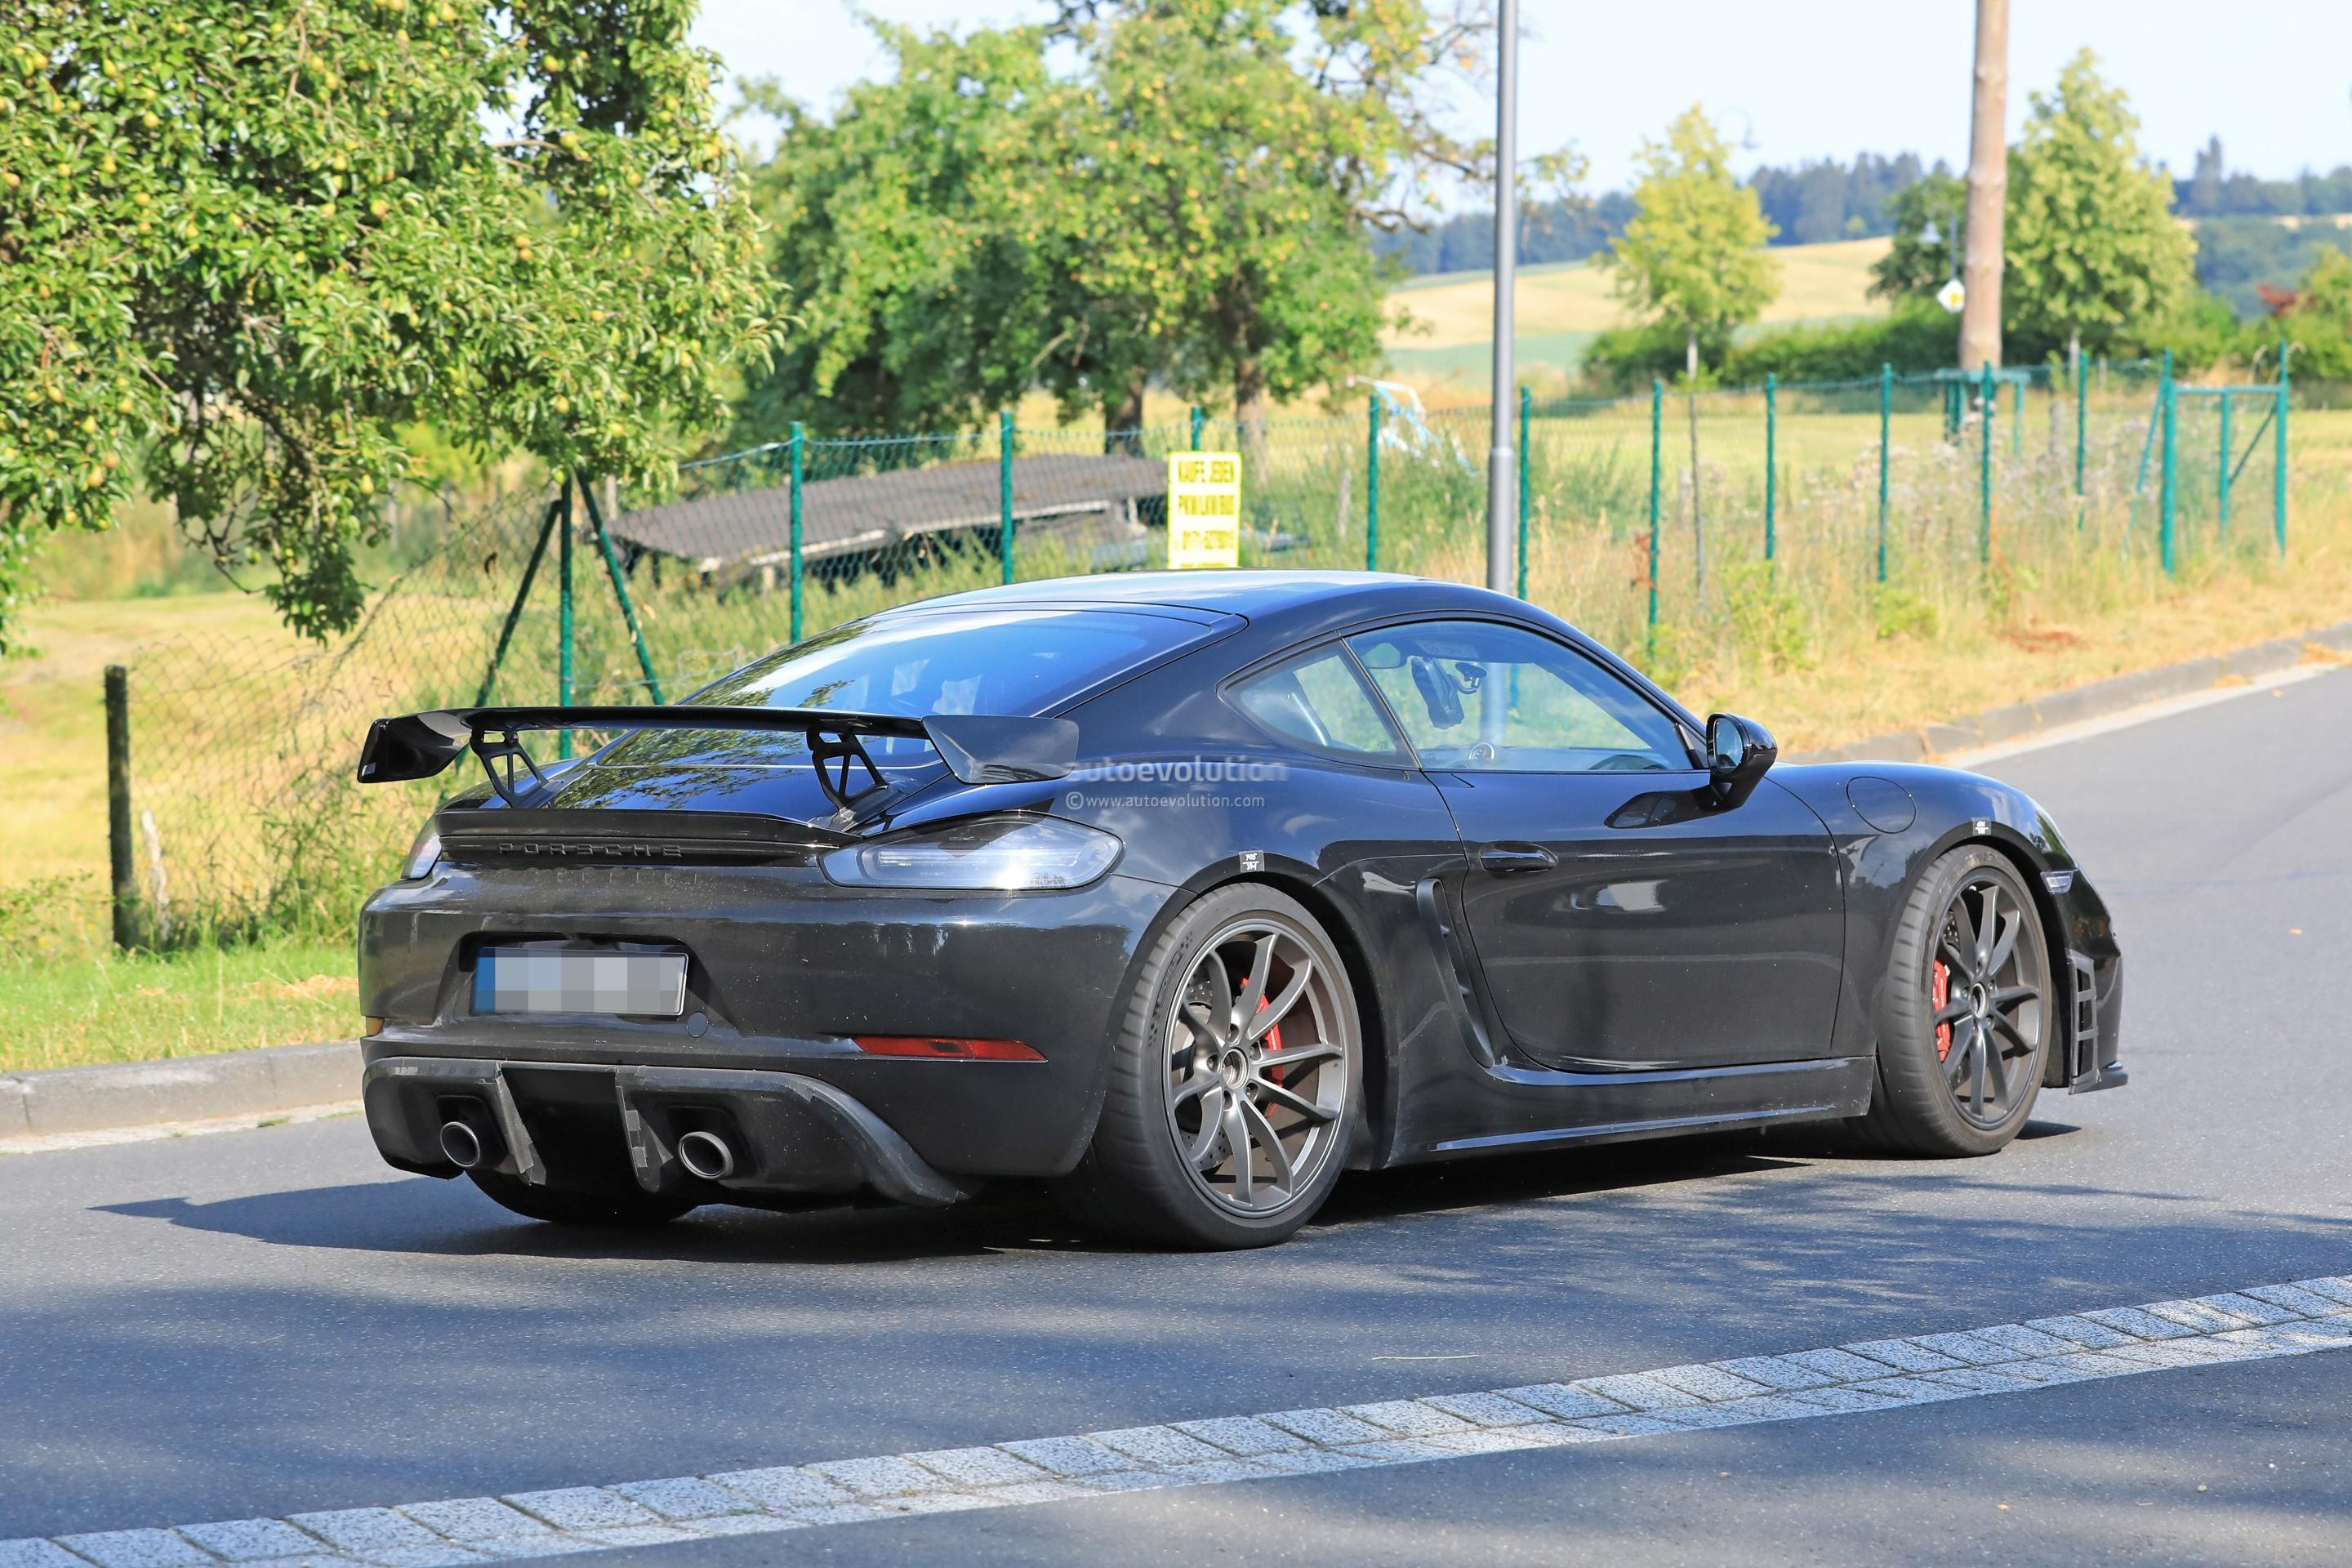 Porsche 718 Cayman GT4 Spotted at Nurburgring, Reveals New Rear